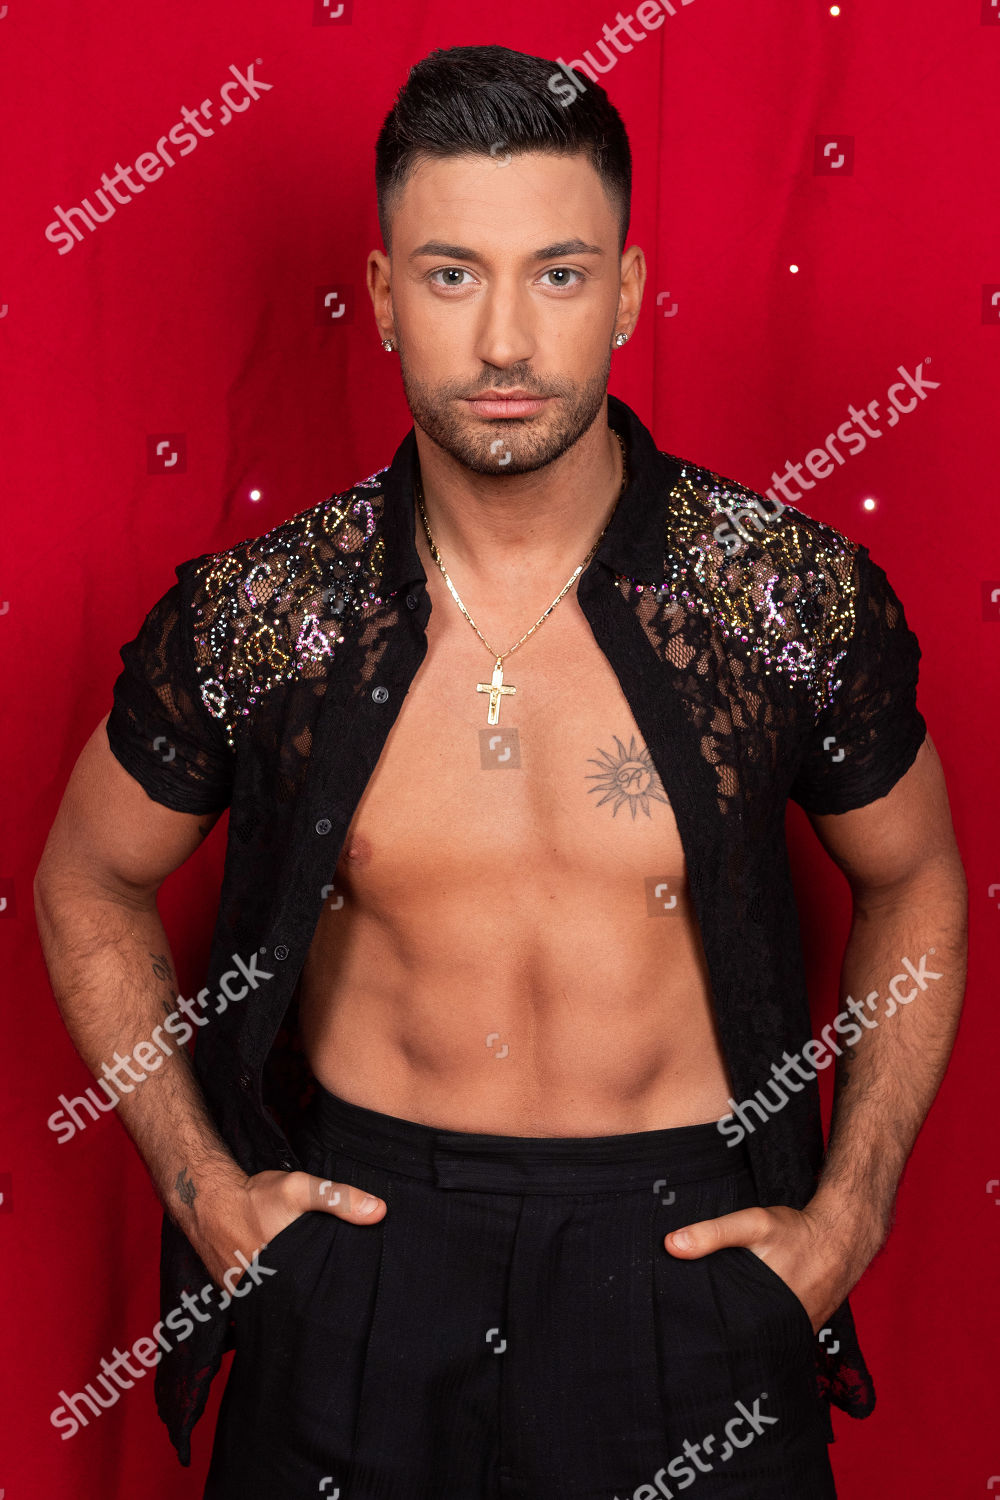 exclusive-strictly-come-dancing-live-tour-backstage-birmingham-uk-shutterstock-editorial-10066787ar.jpg